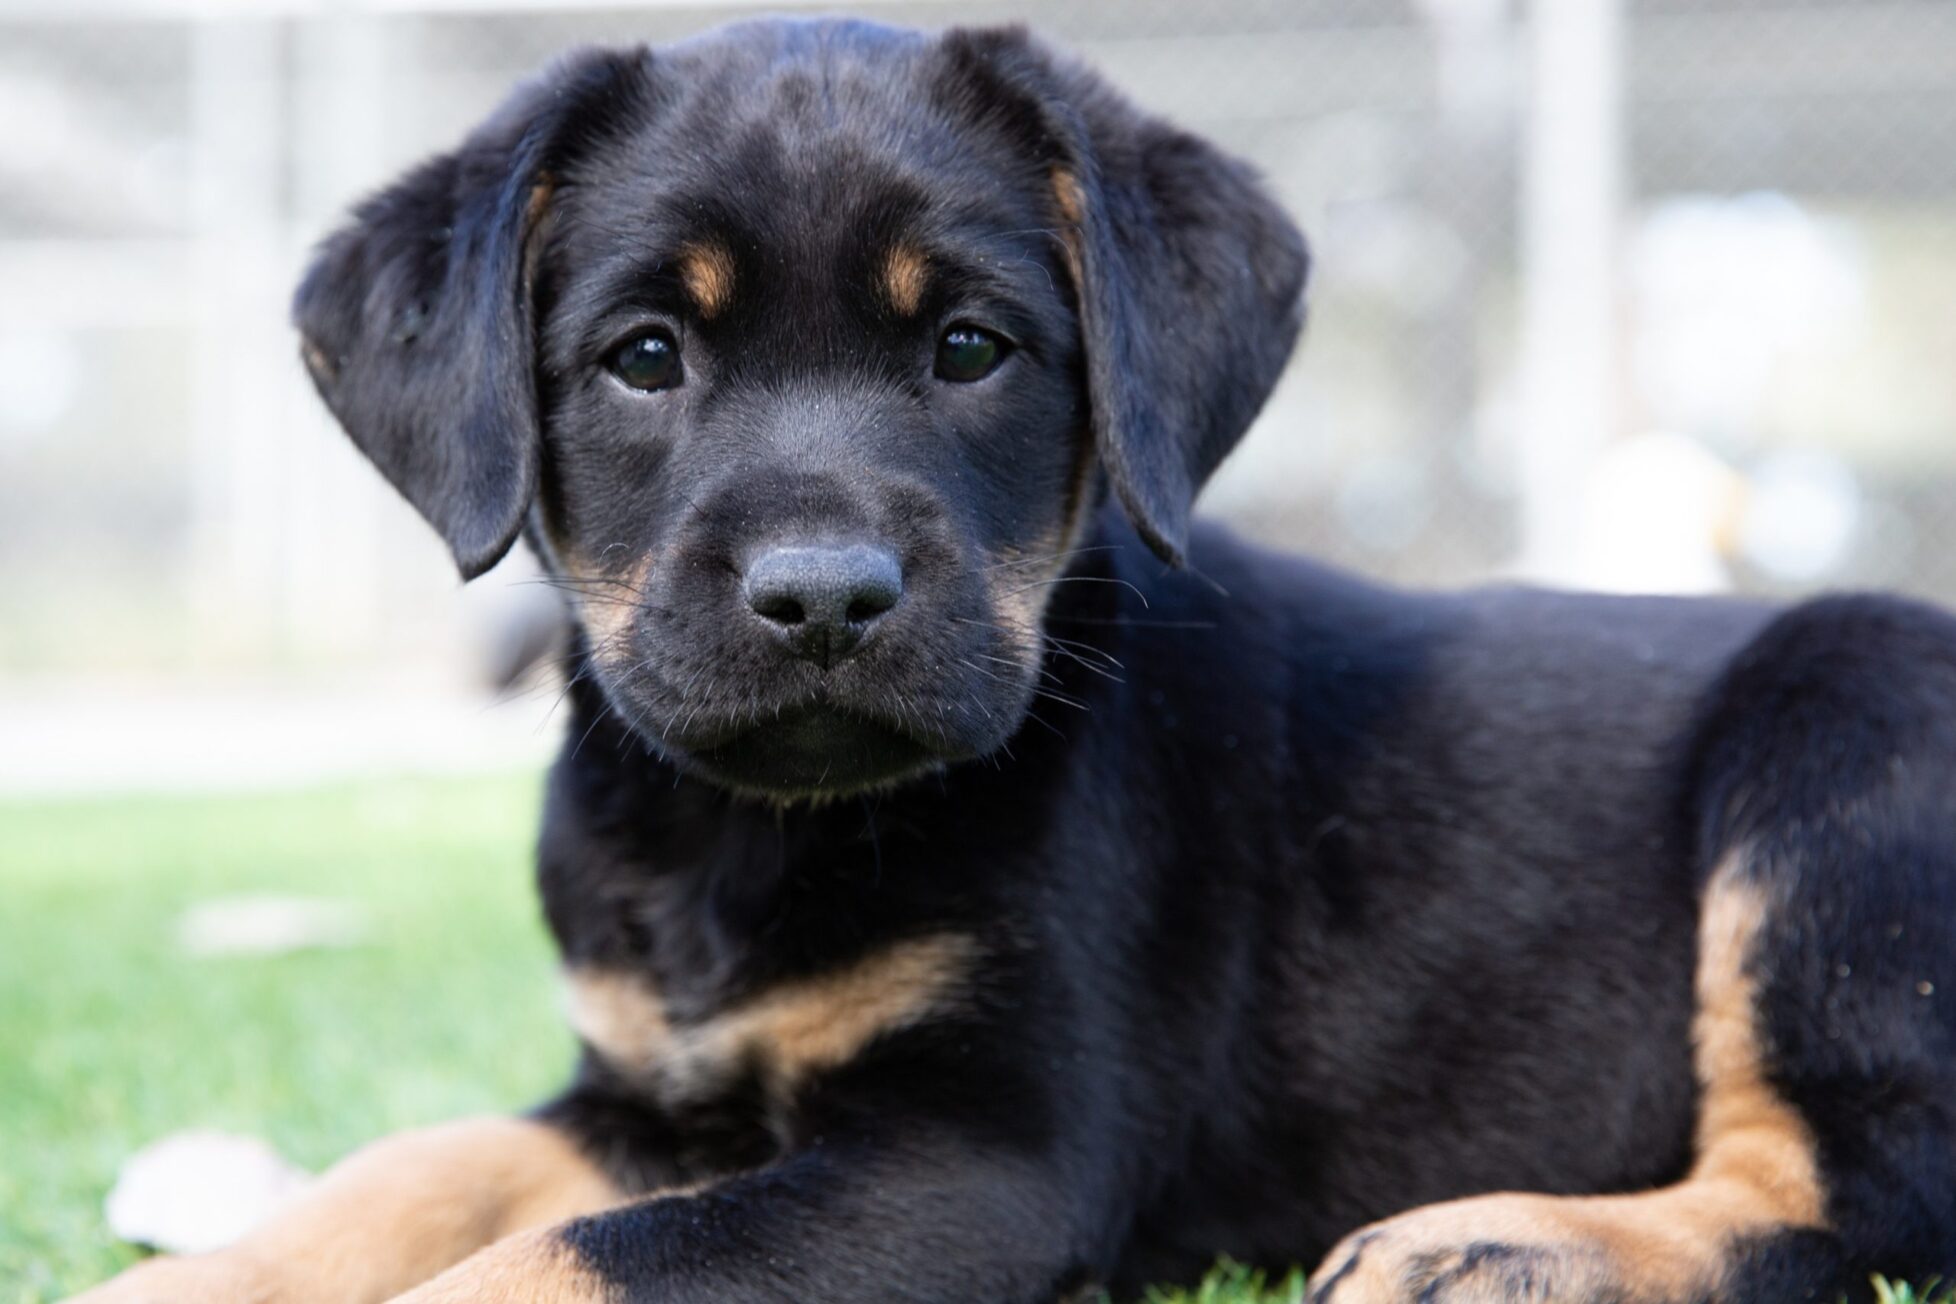 A brindle Labrador puppy seated on the grass looking directly at the camera.